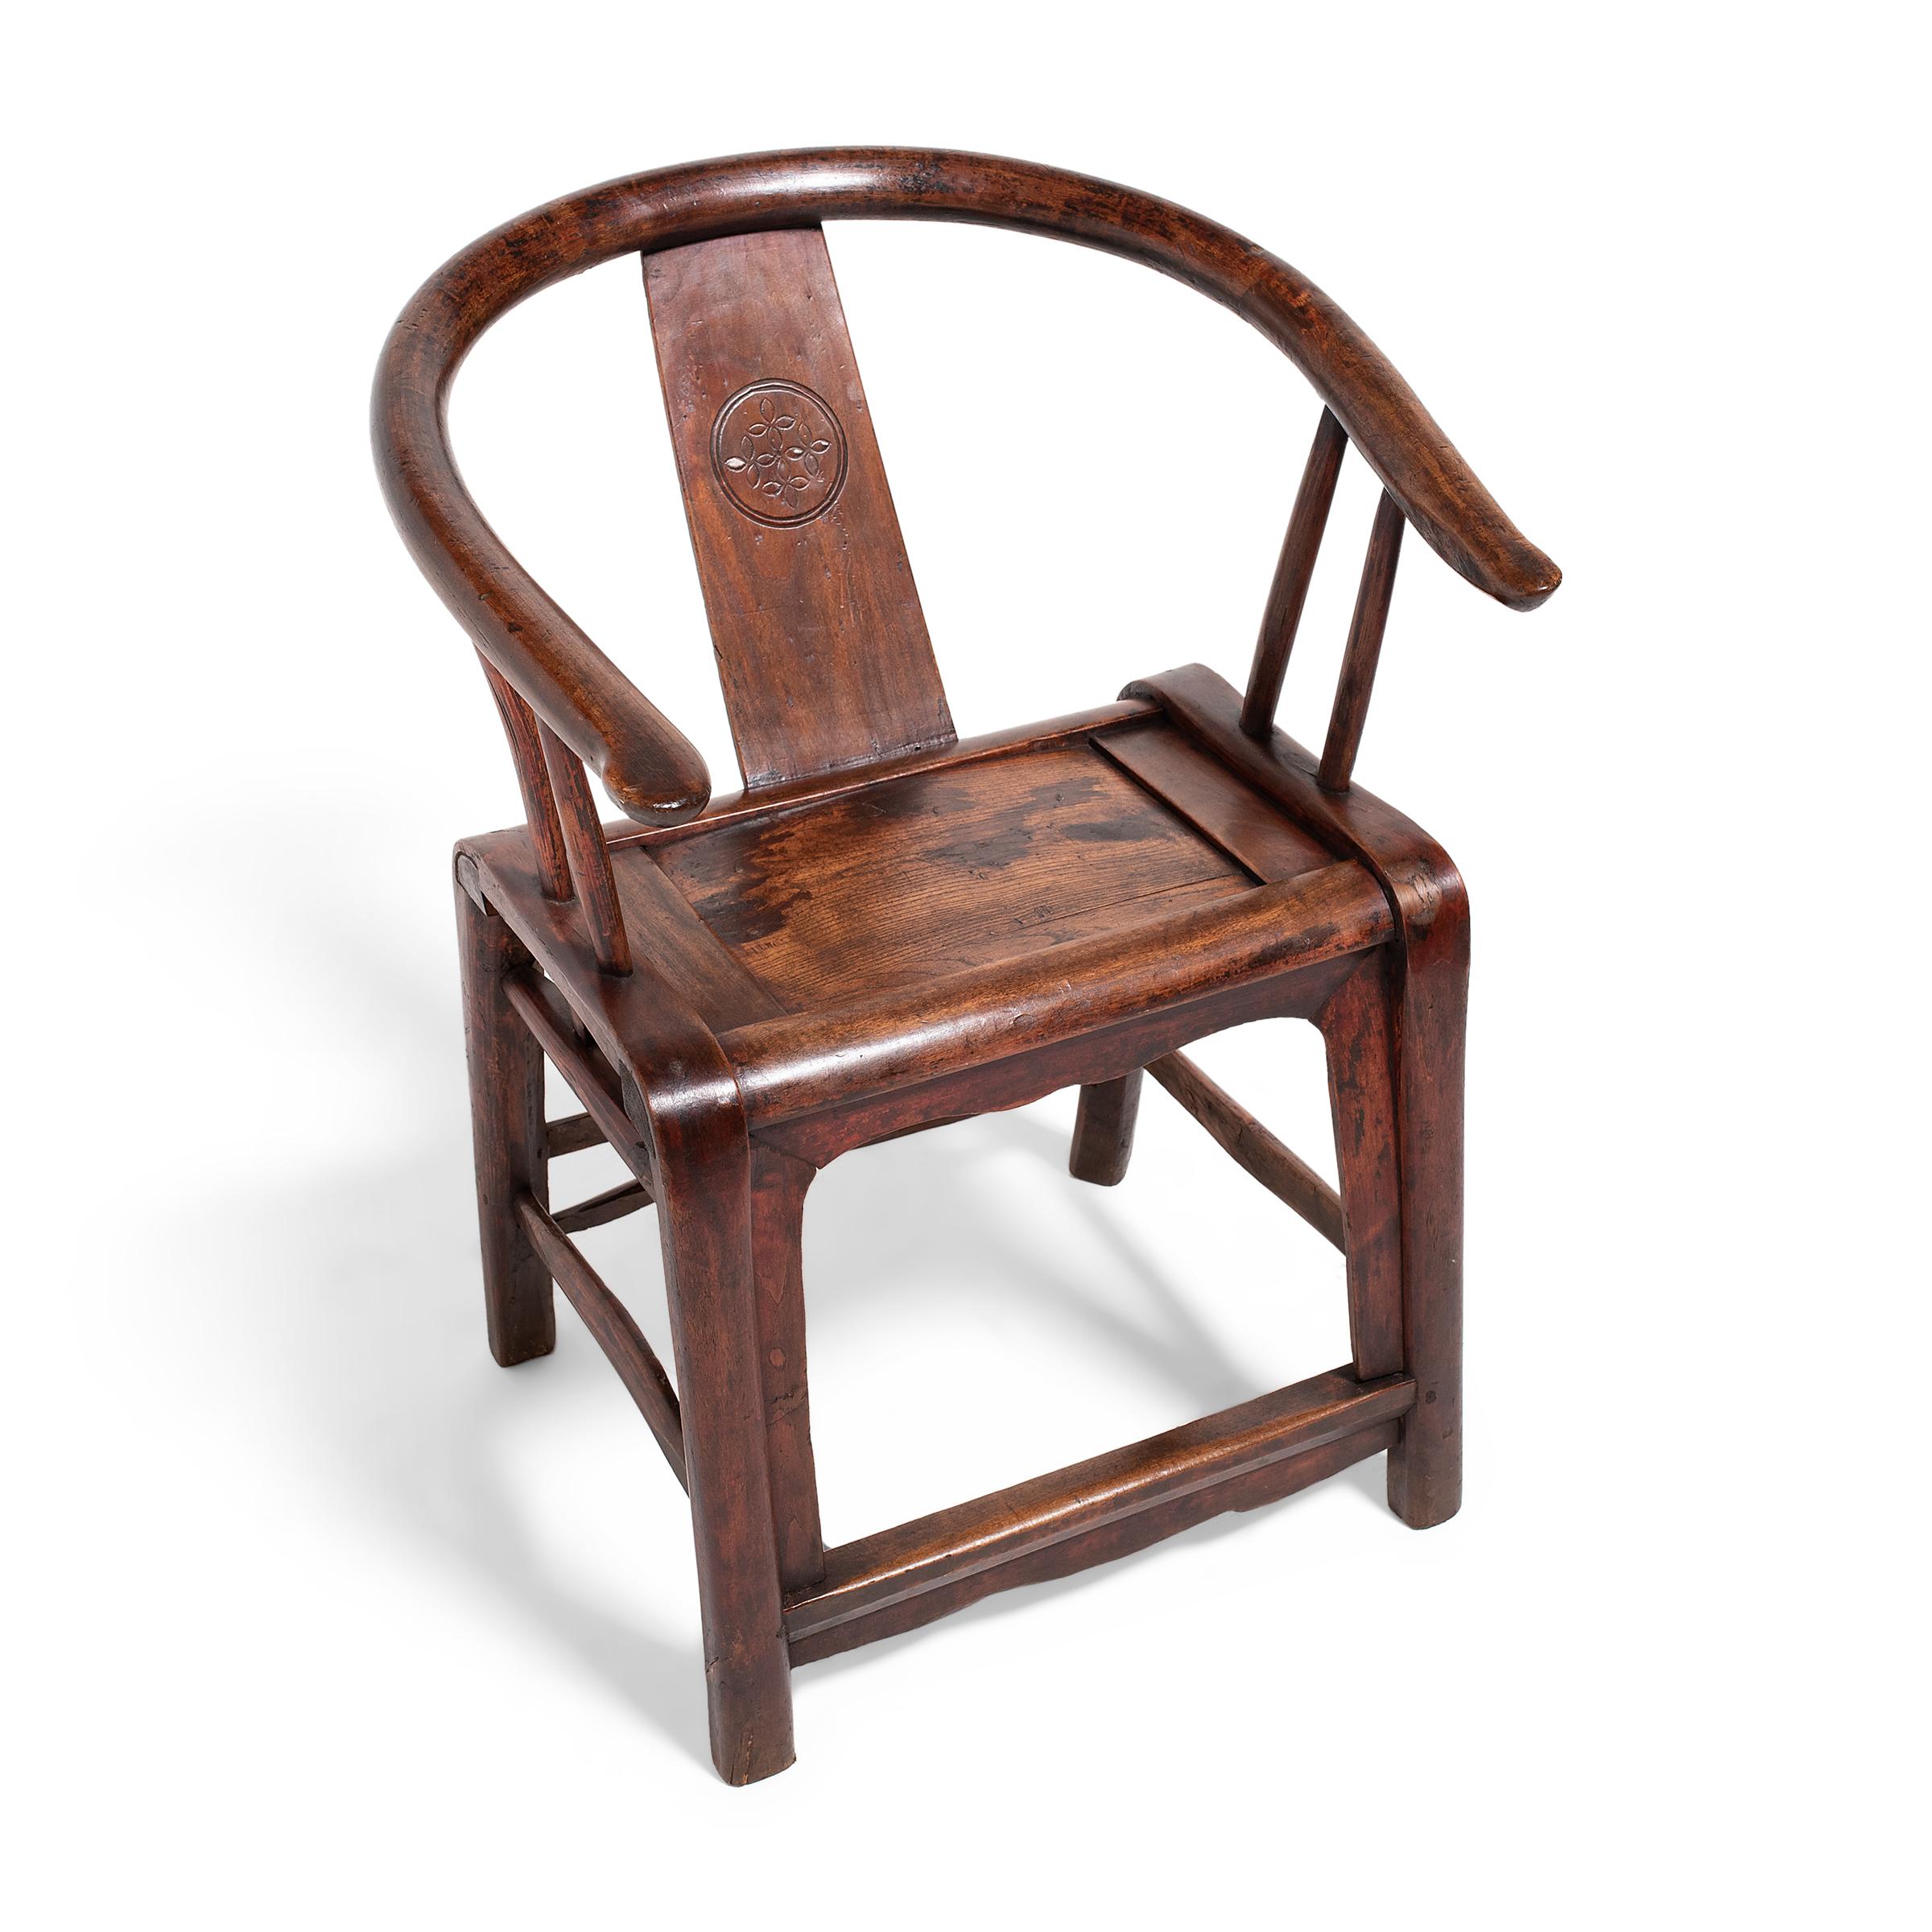 Chinese Lacquered Roundback Chair, c. 1850 In Good Condition For Sale In Chicago, IL